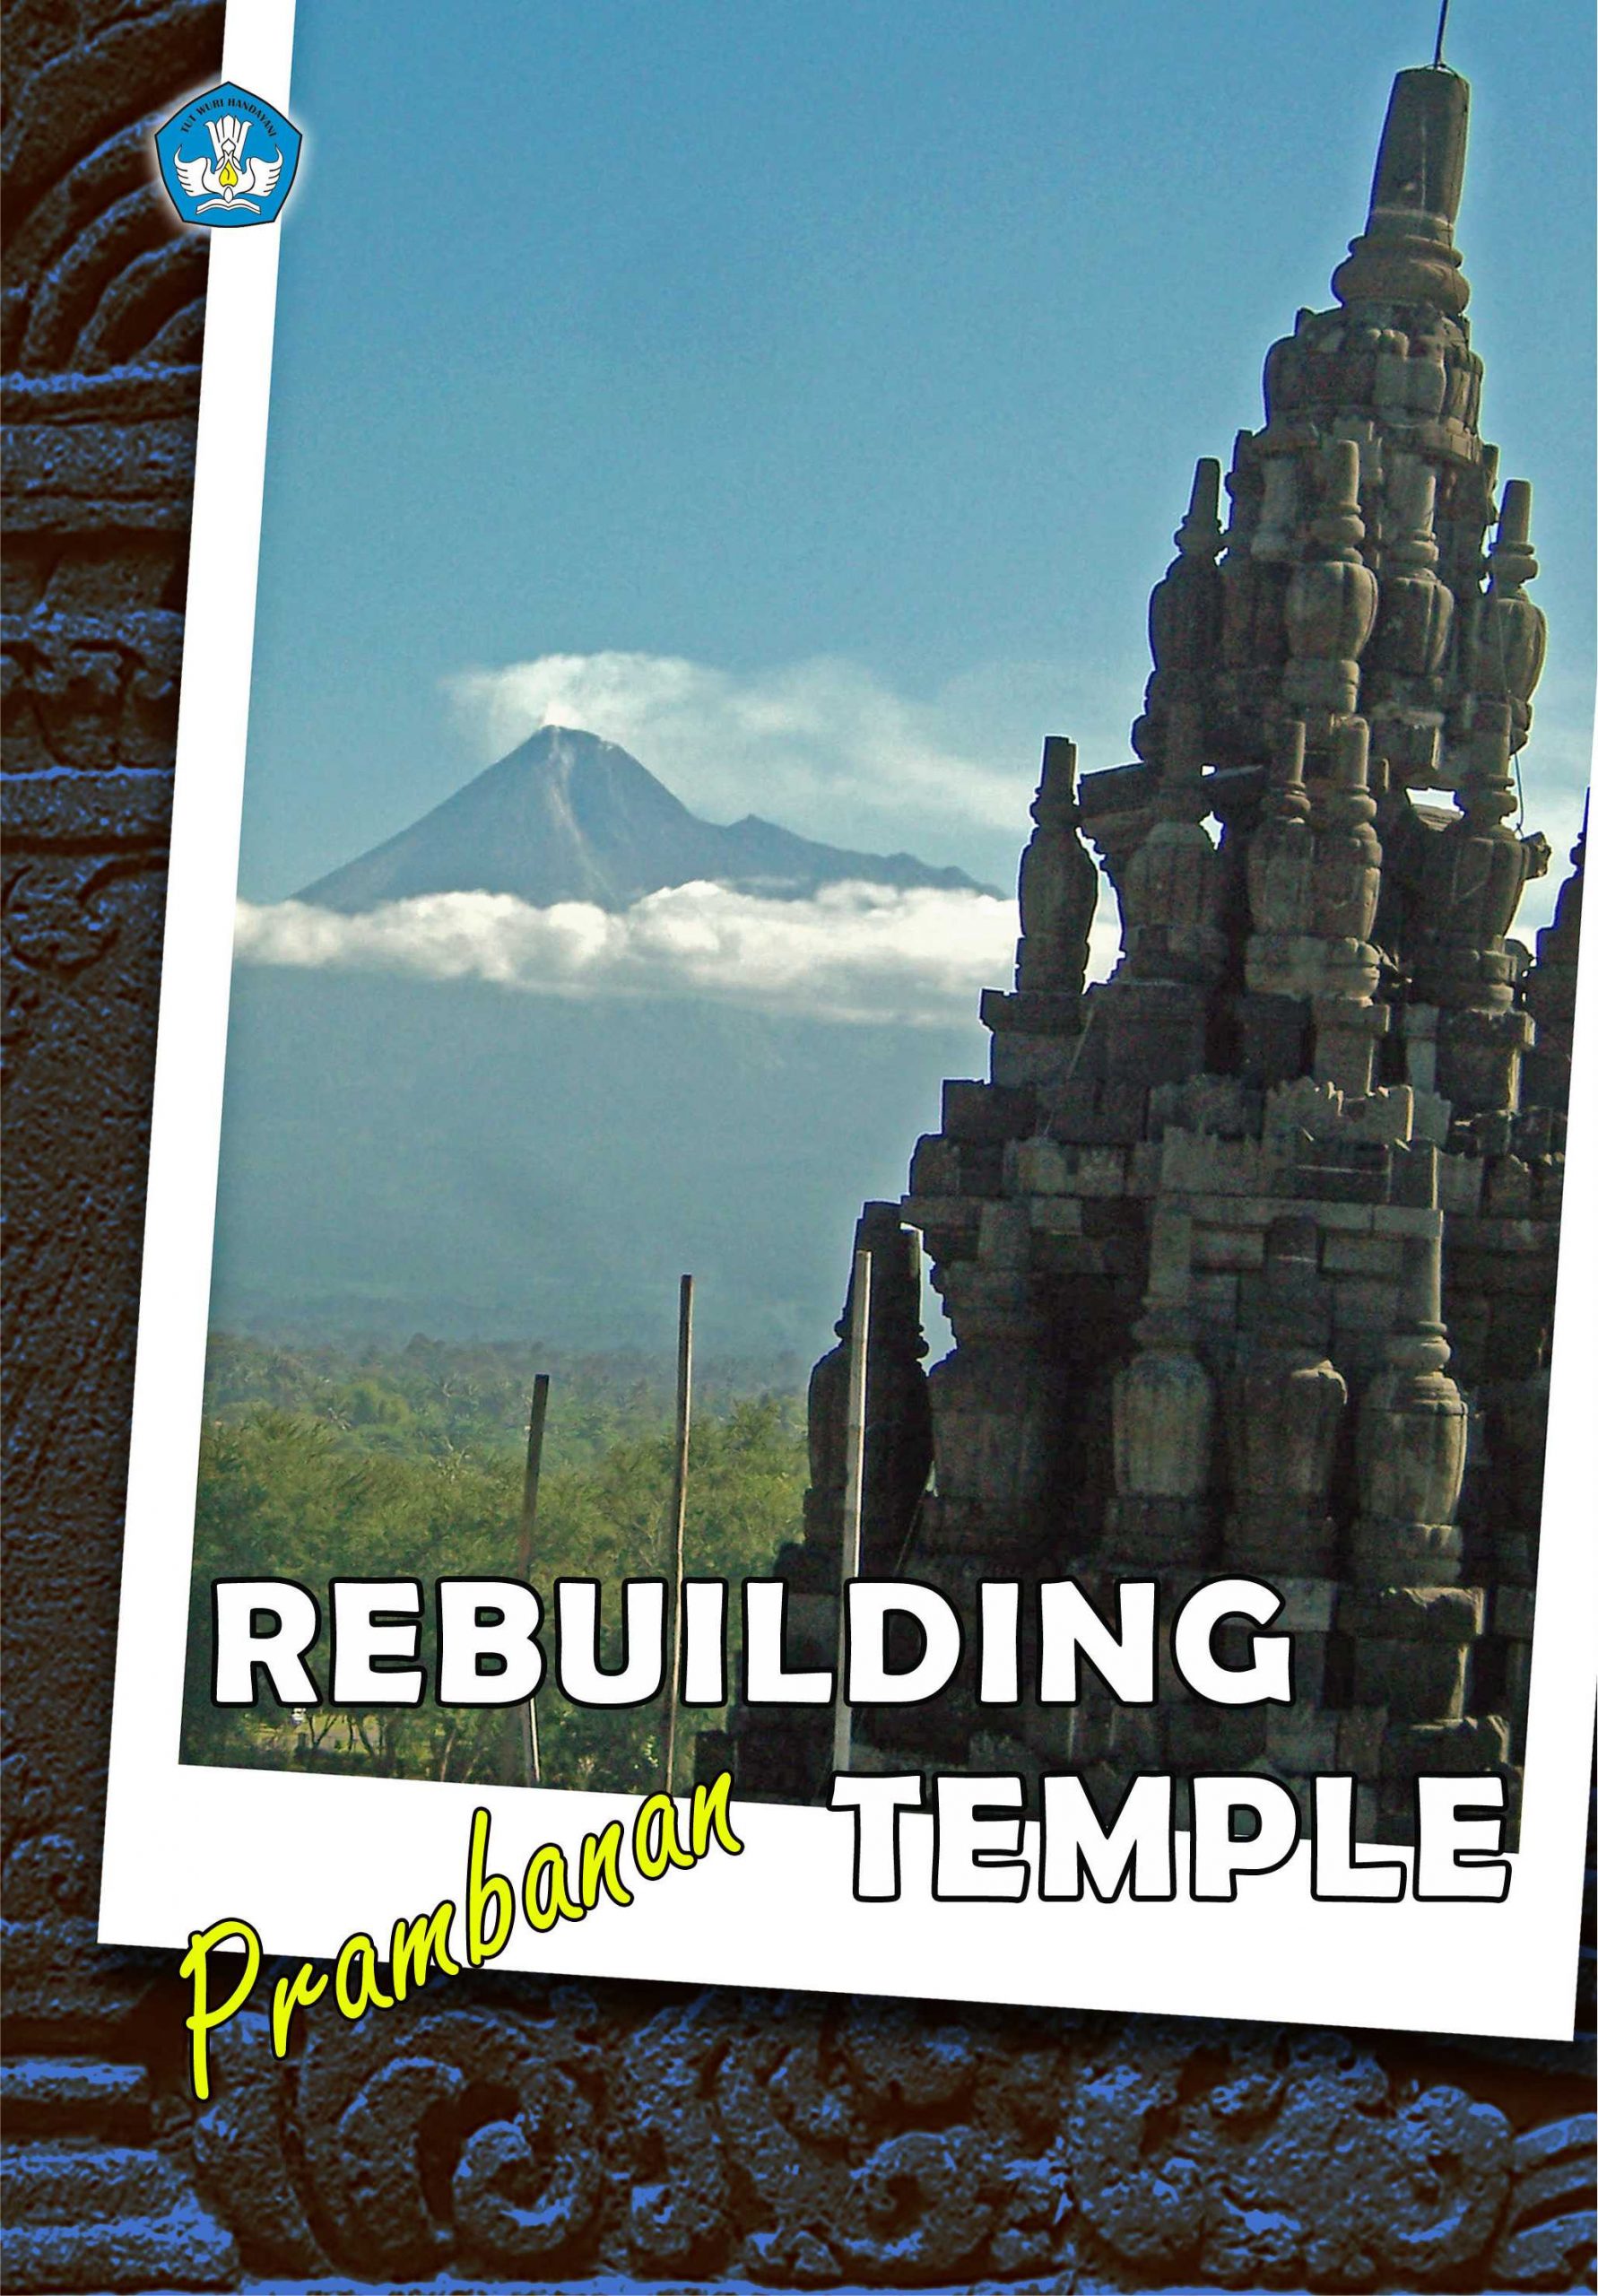 Read more about the article Rebuilding Prambanan Temple